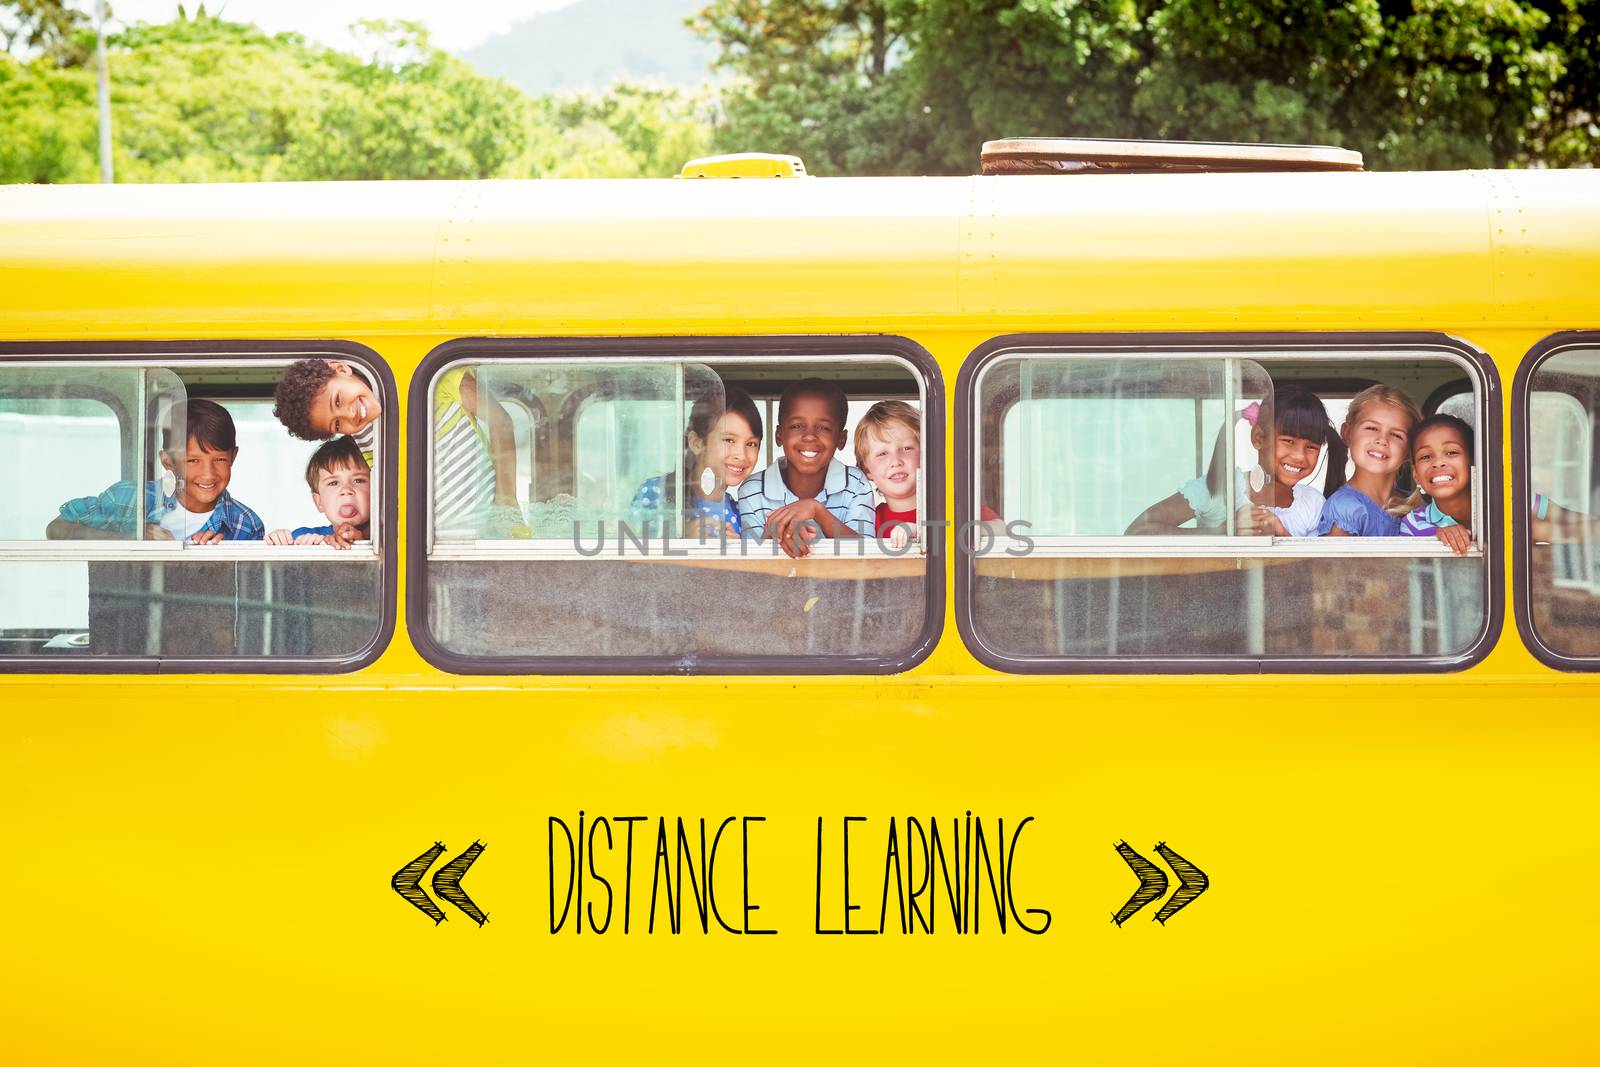 The word distance learning against cute pupils smiling at camera in the school bus